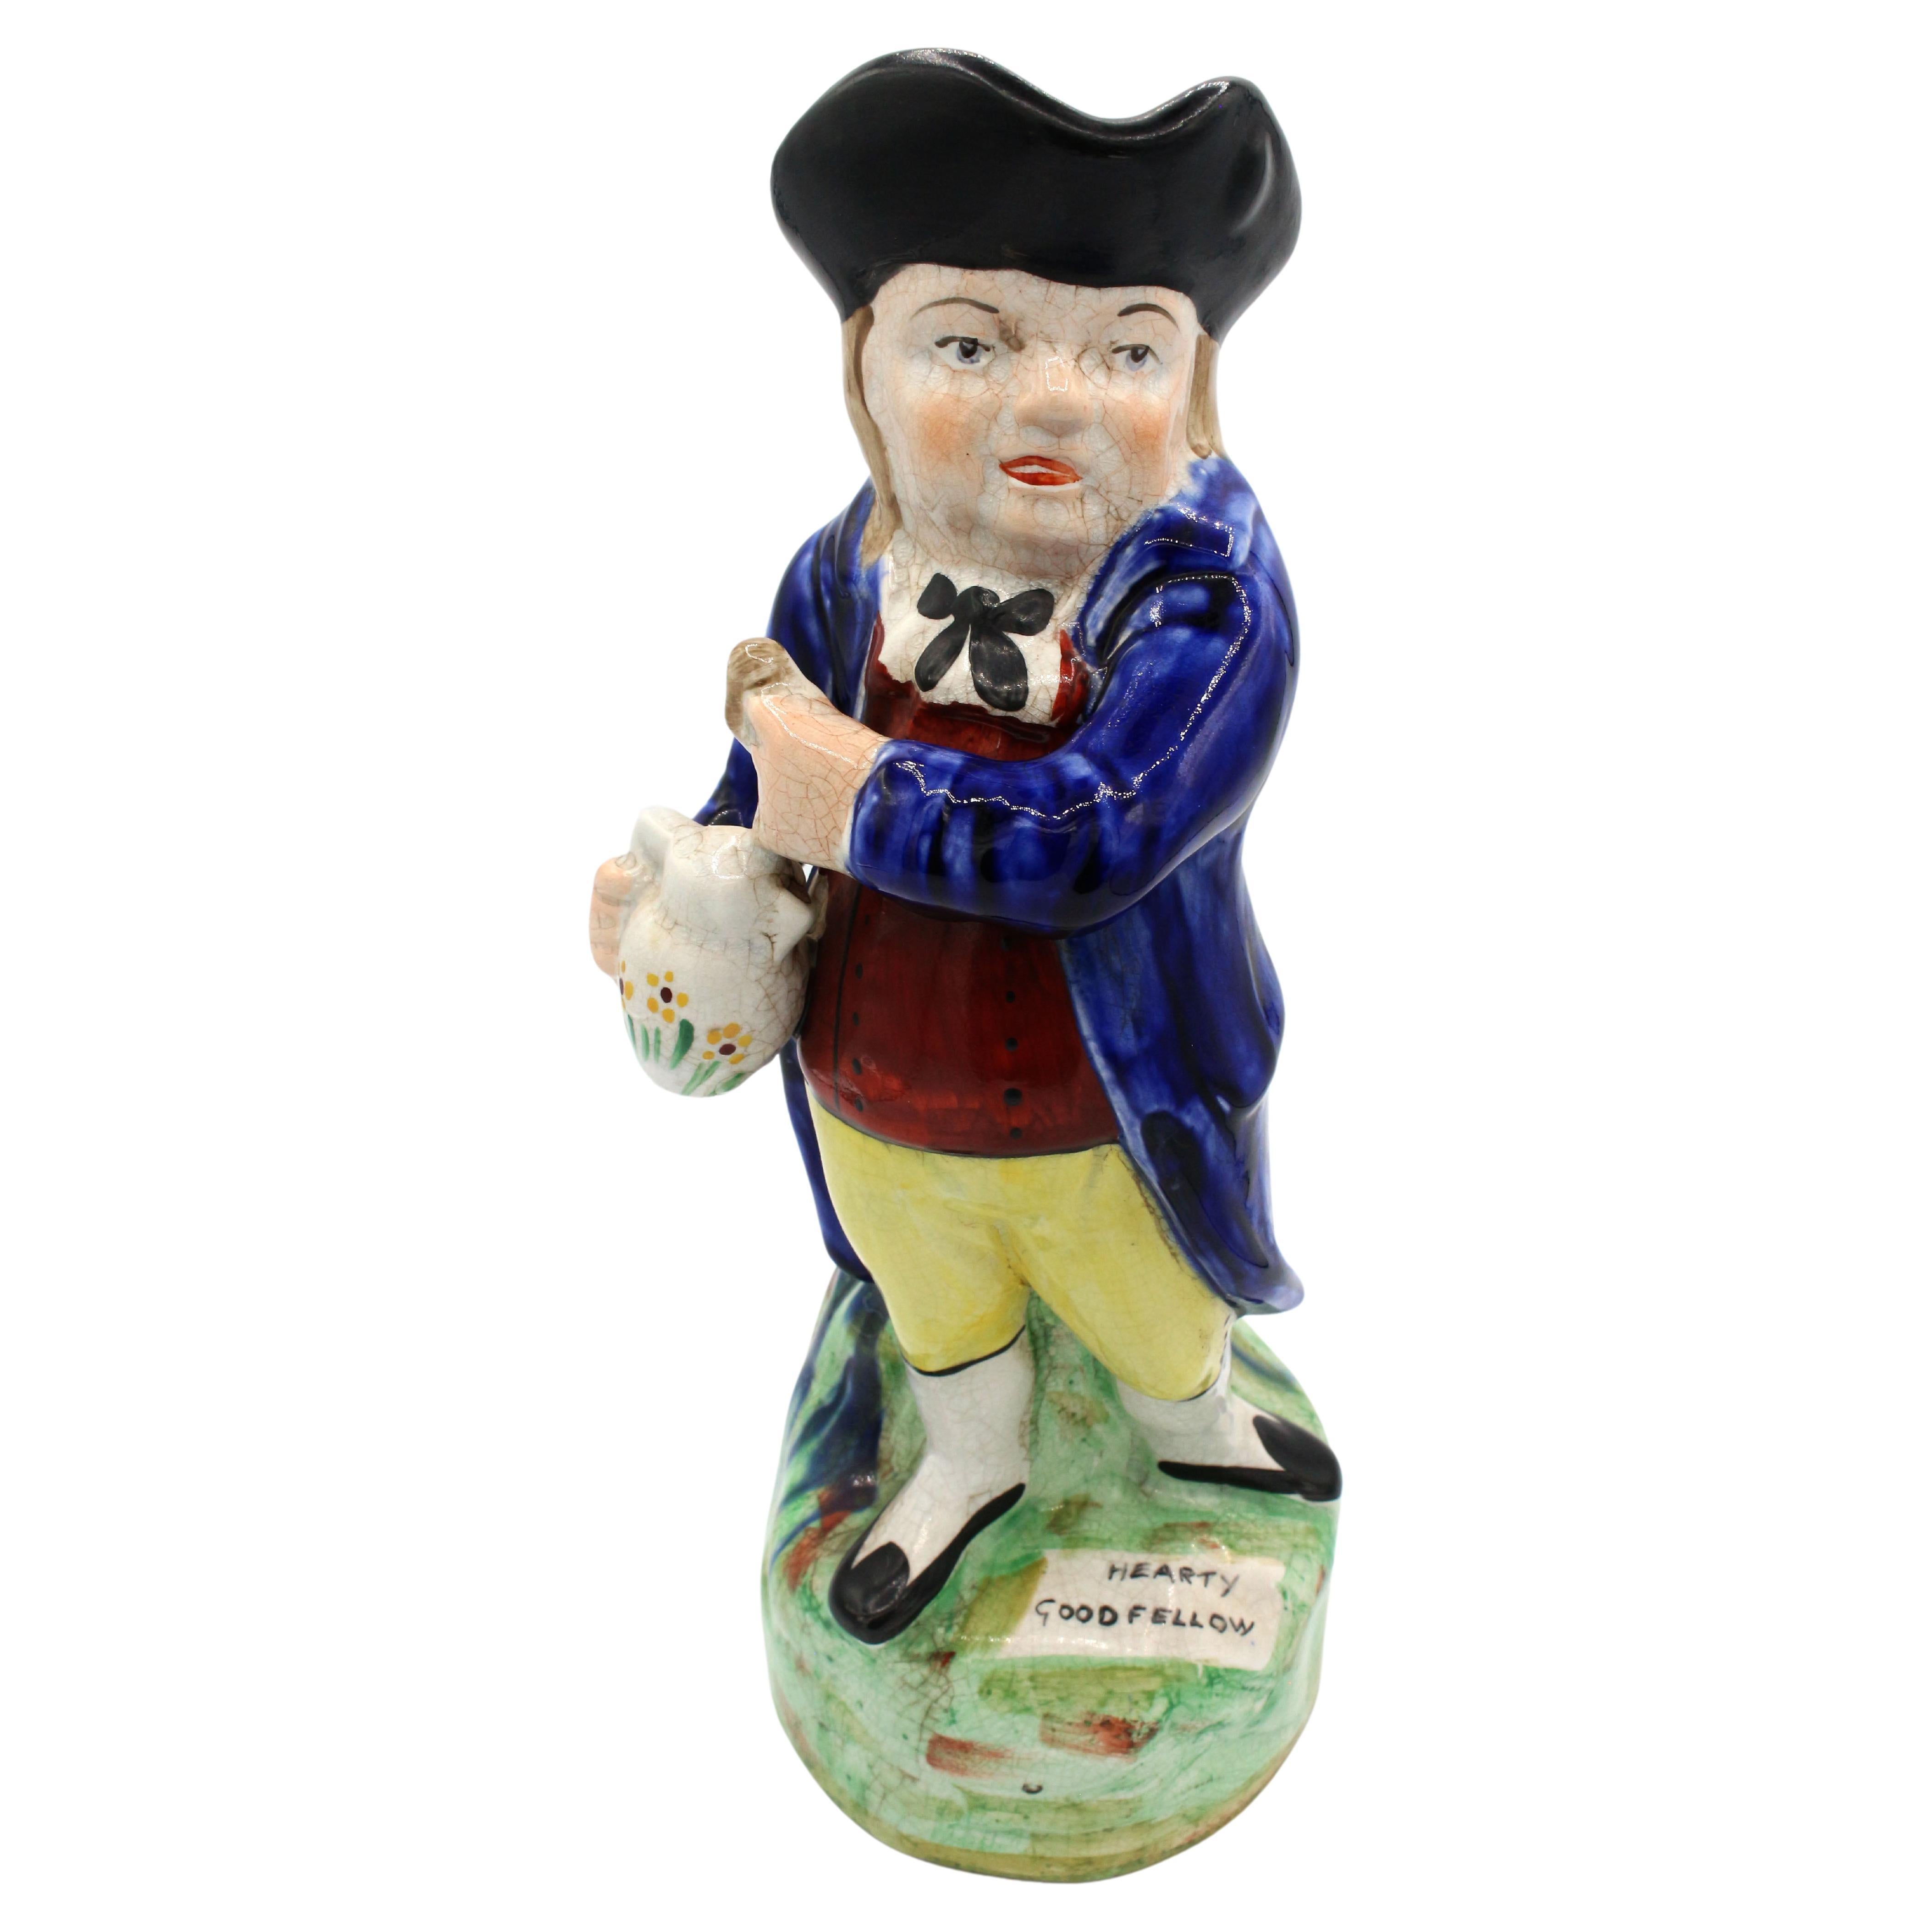 Hearty Goodfellow Toby Jug, late 19th century, Staffordshire, England